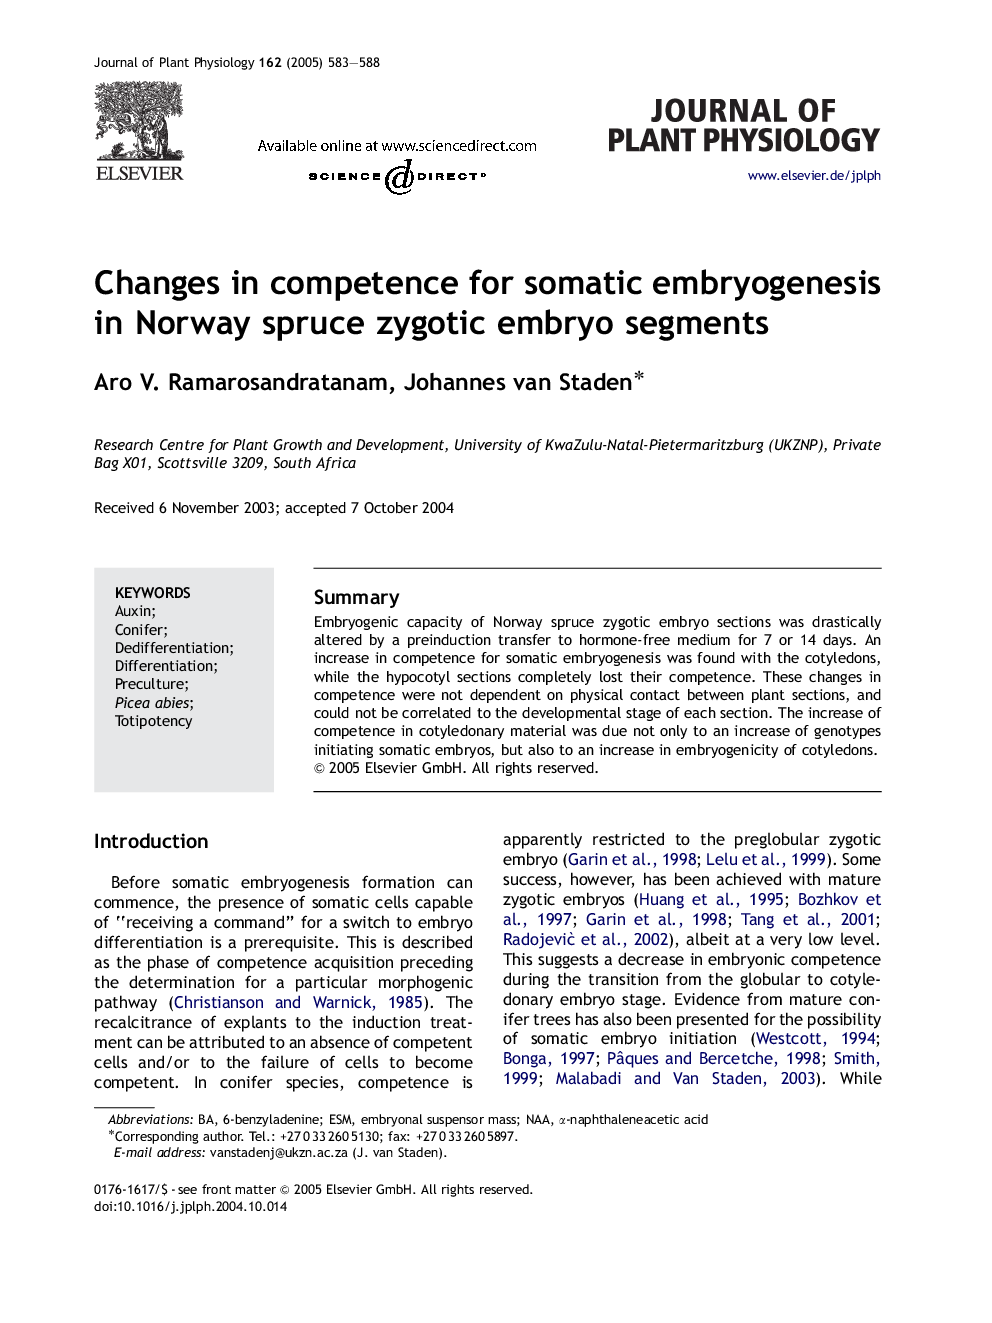 Changes in competence for somatic embryogenesis in Norway spruce zygotic embryo segments